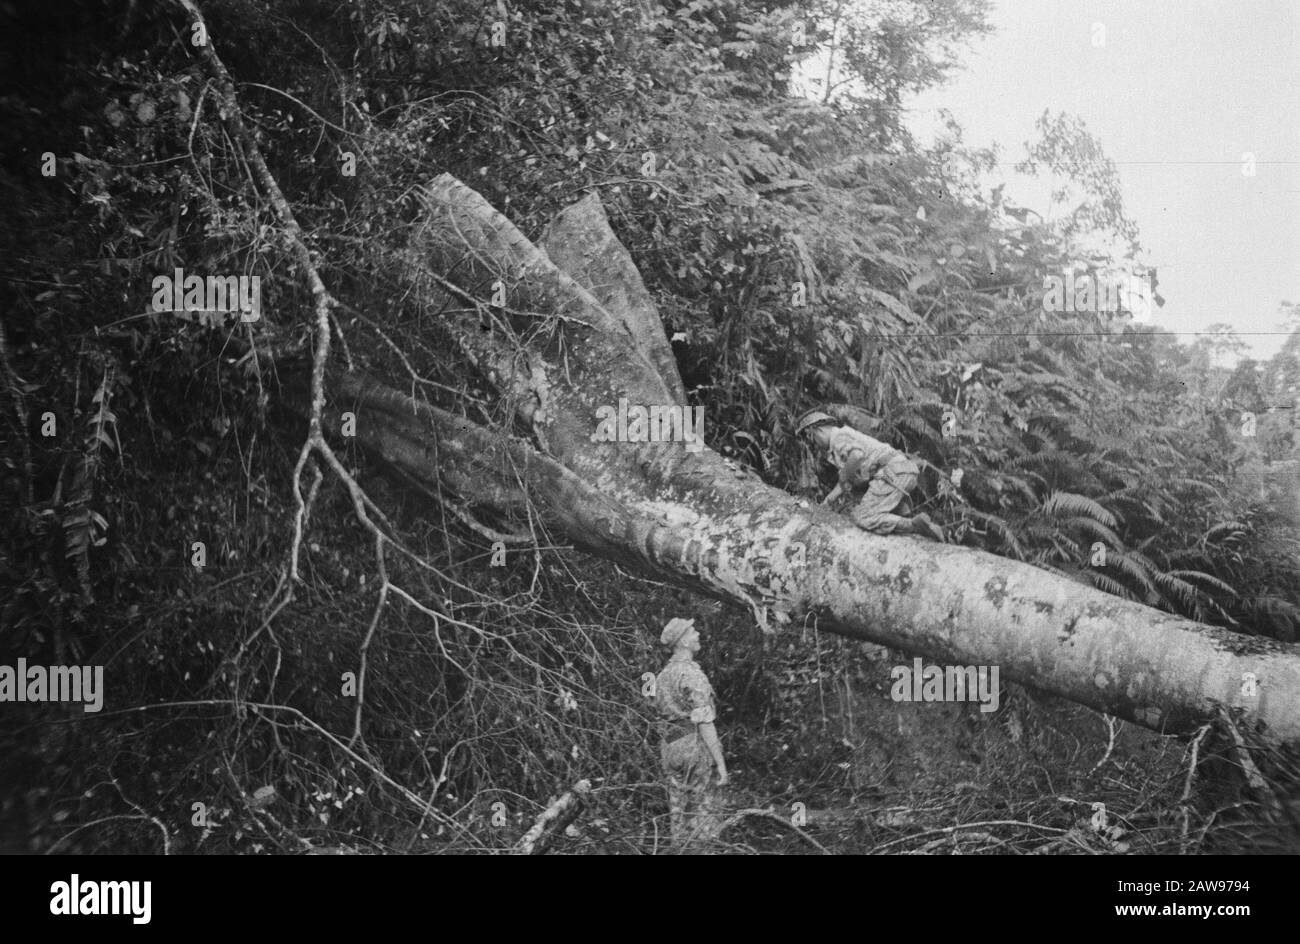 Action Kota Padang  Kotta Pandan: a roadblock consisting of a road felled tree with explosives cleared Date: July 1947 Location: Indonesia, Dutch East Indies Stock Photo